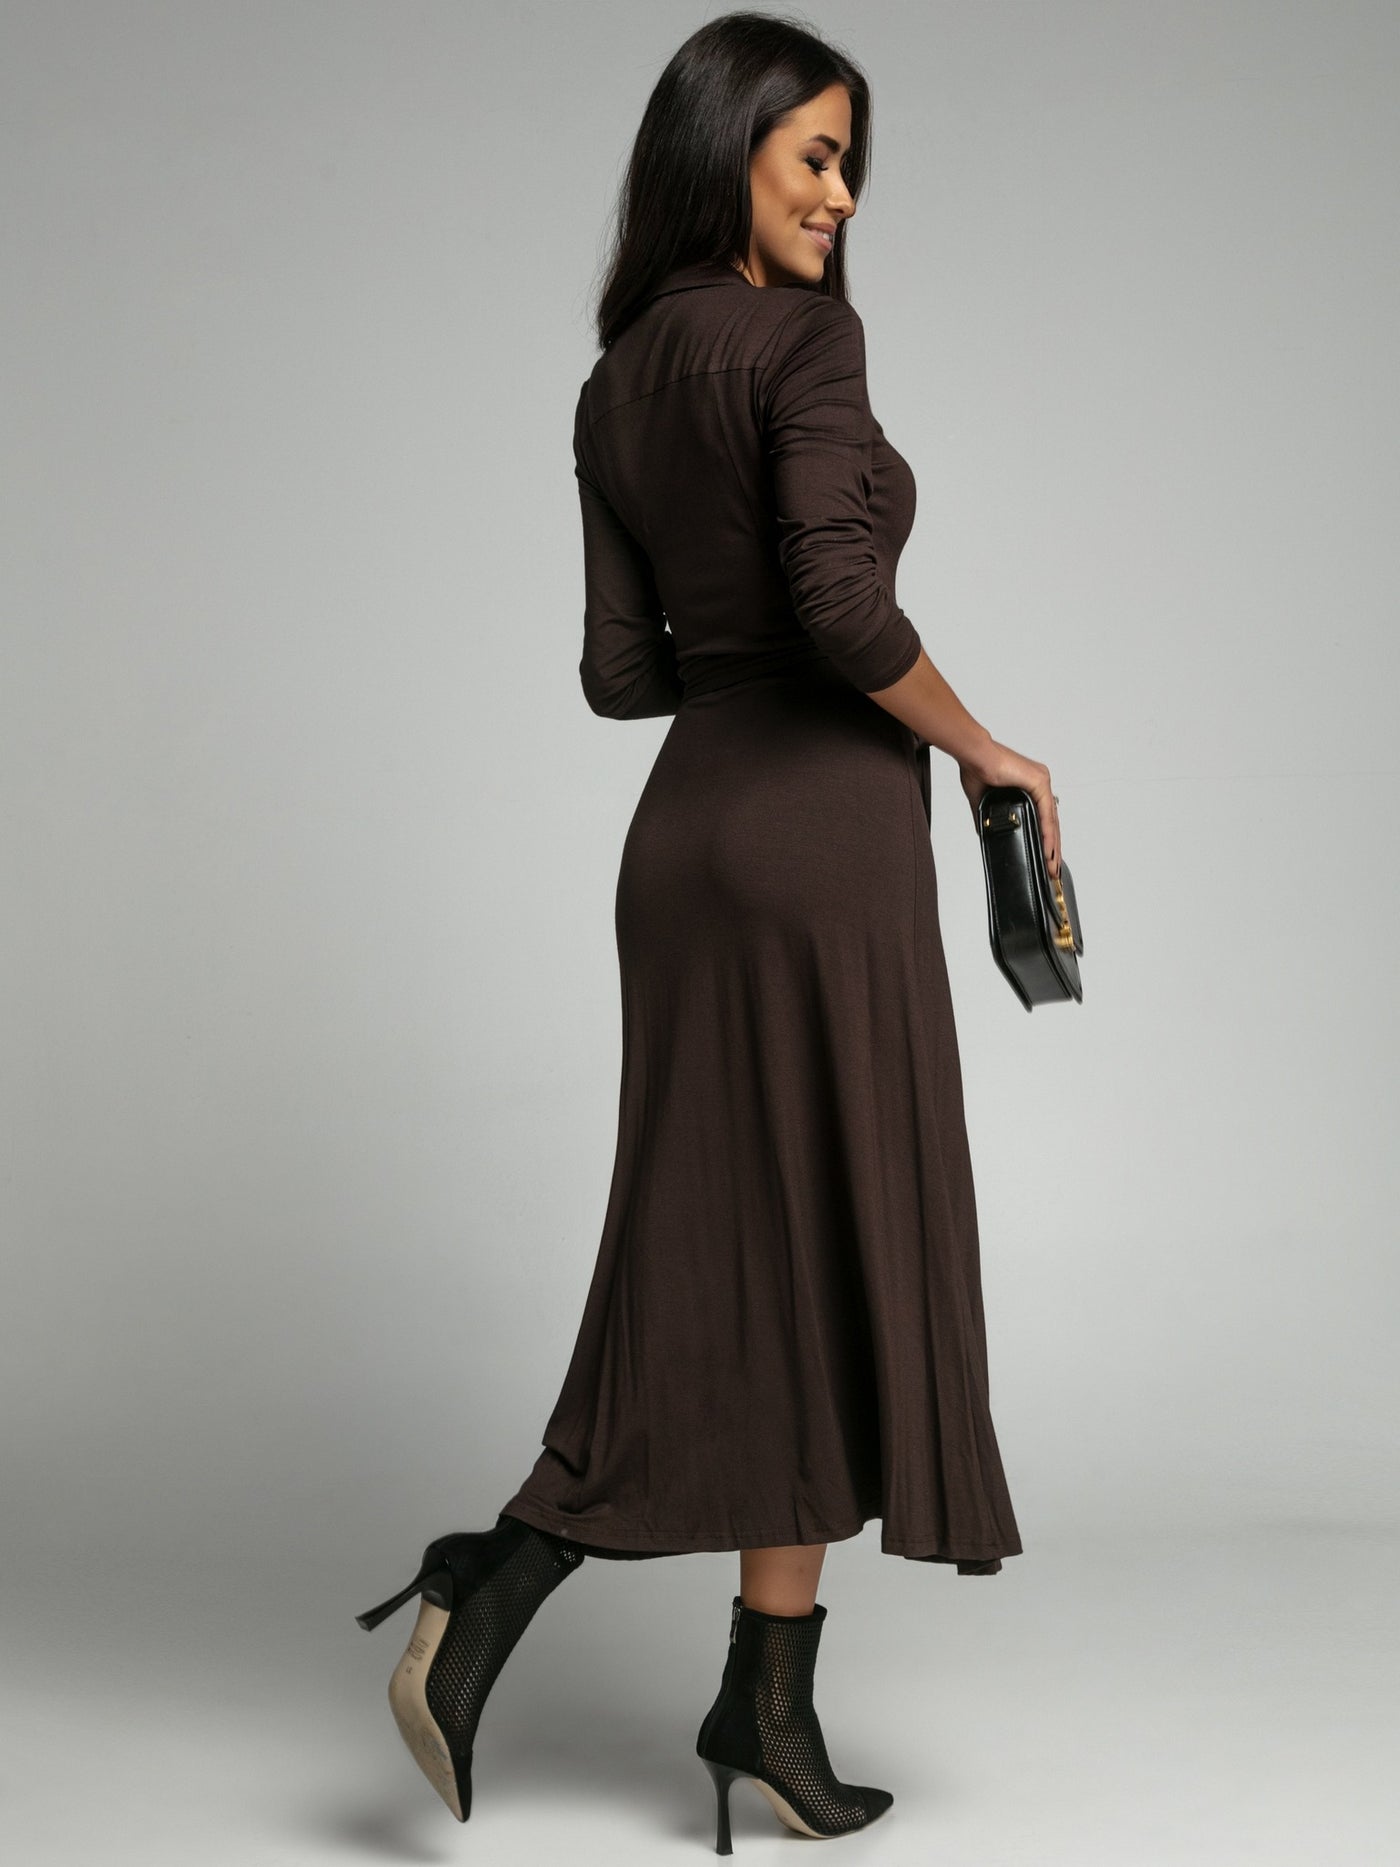 Long Chocolate Dress with Button Closure